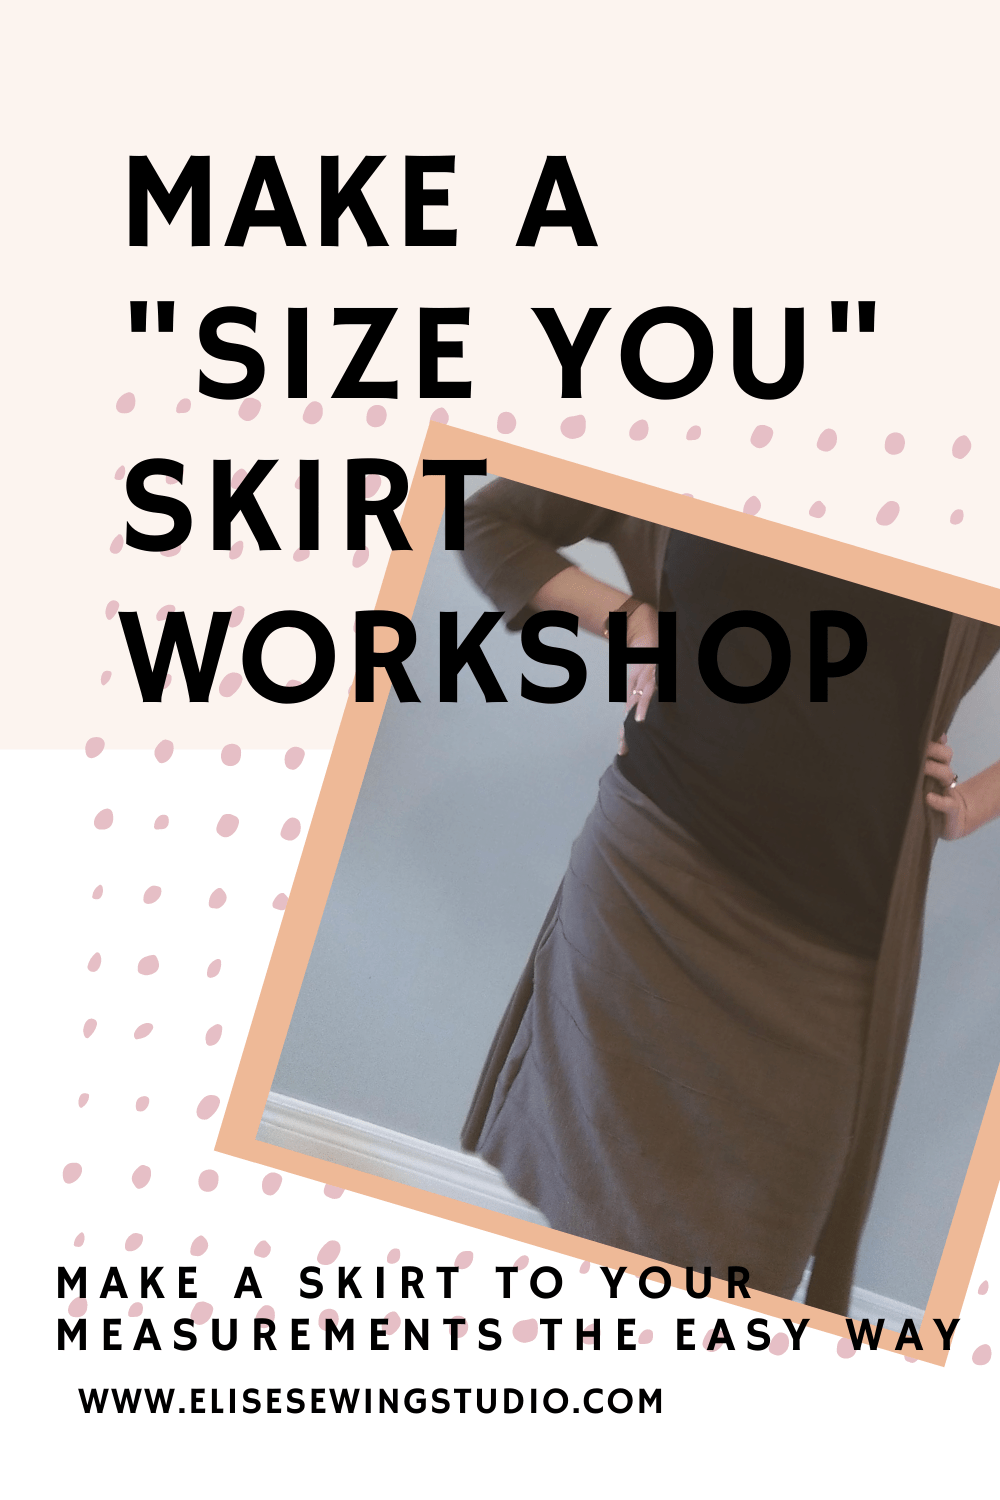 Getting your measurements for a skirt - How to know what size is